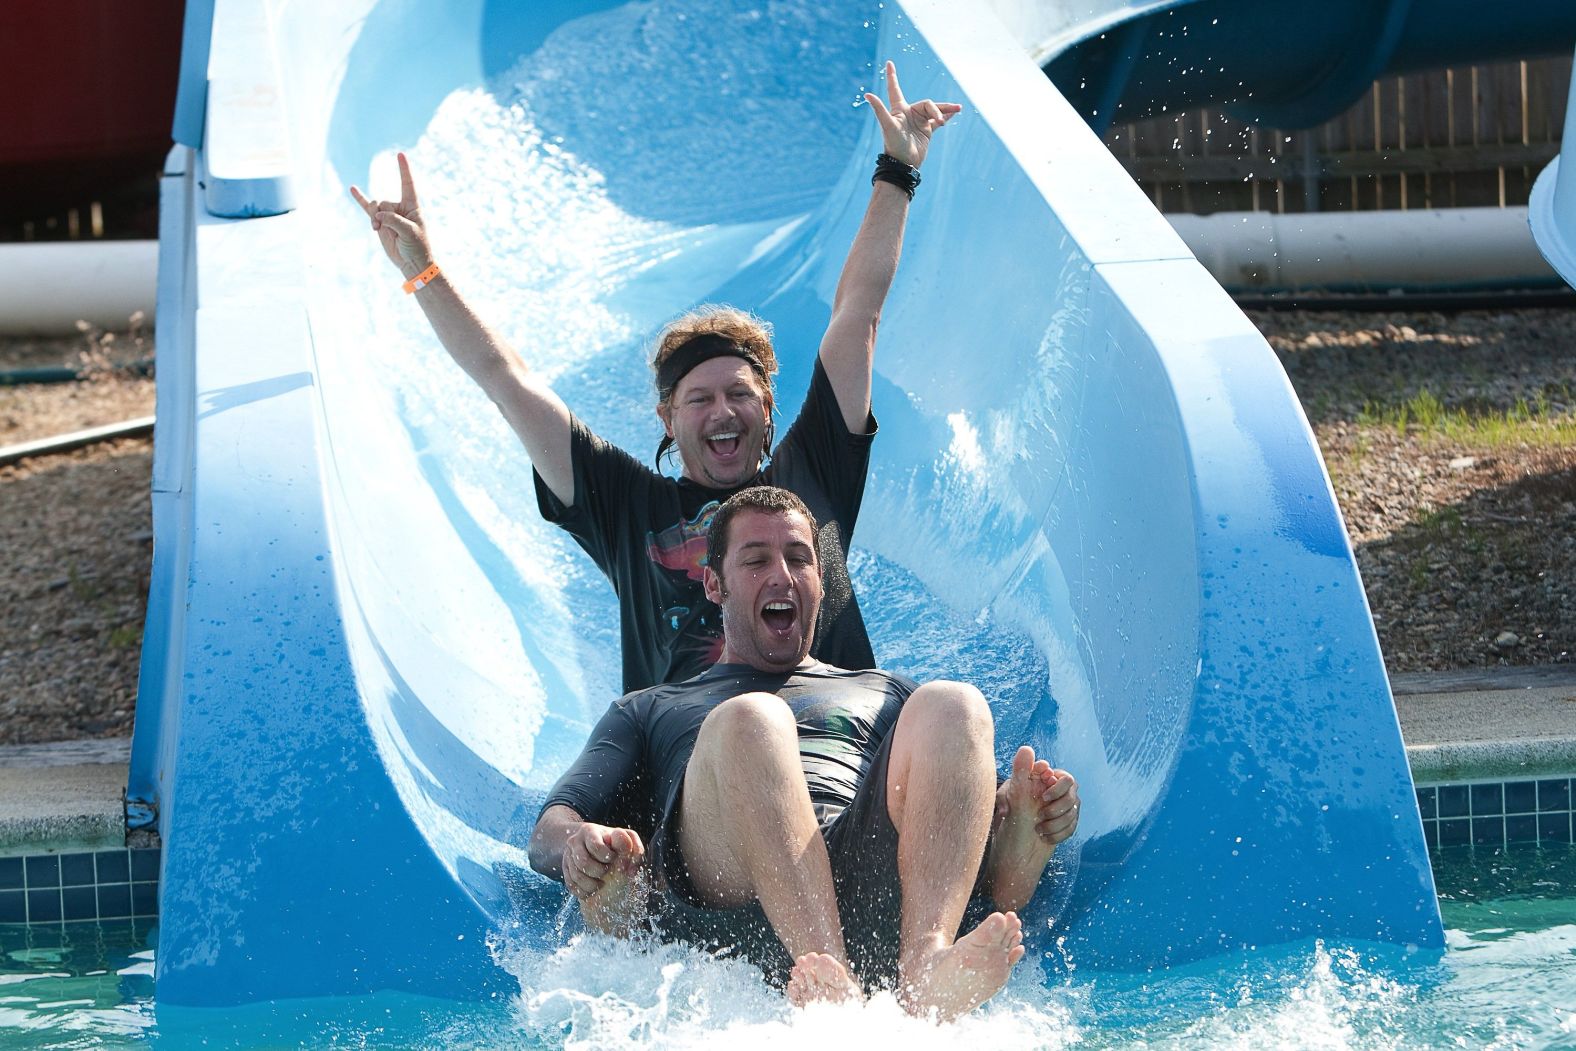 Sandler and Spade go down a water slide in the 2010 comedy "Grown Ups."